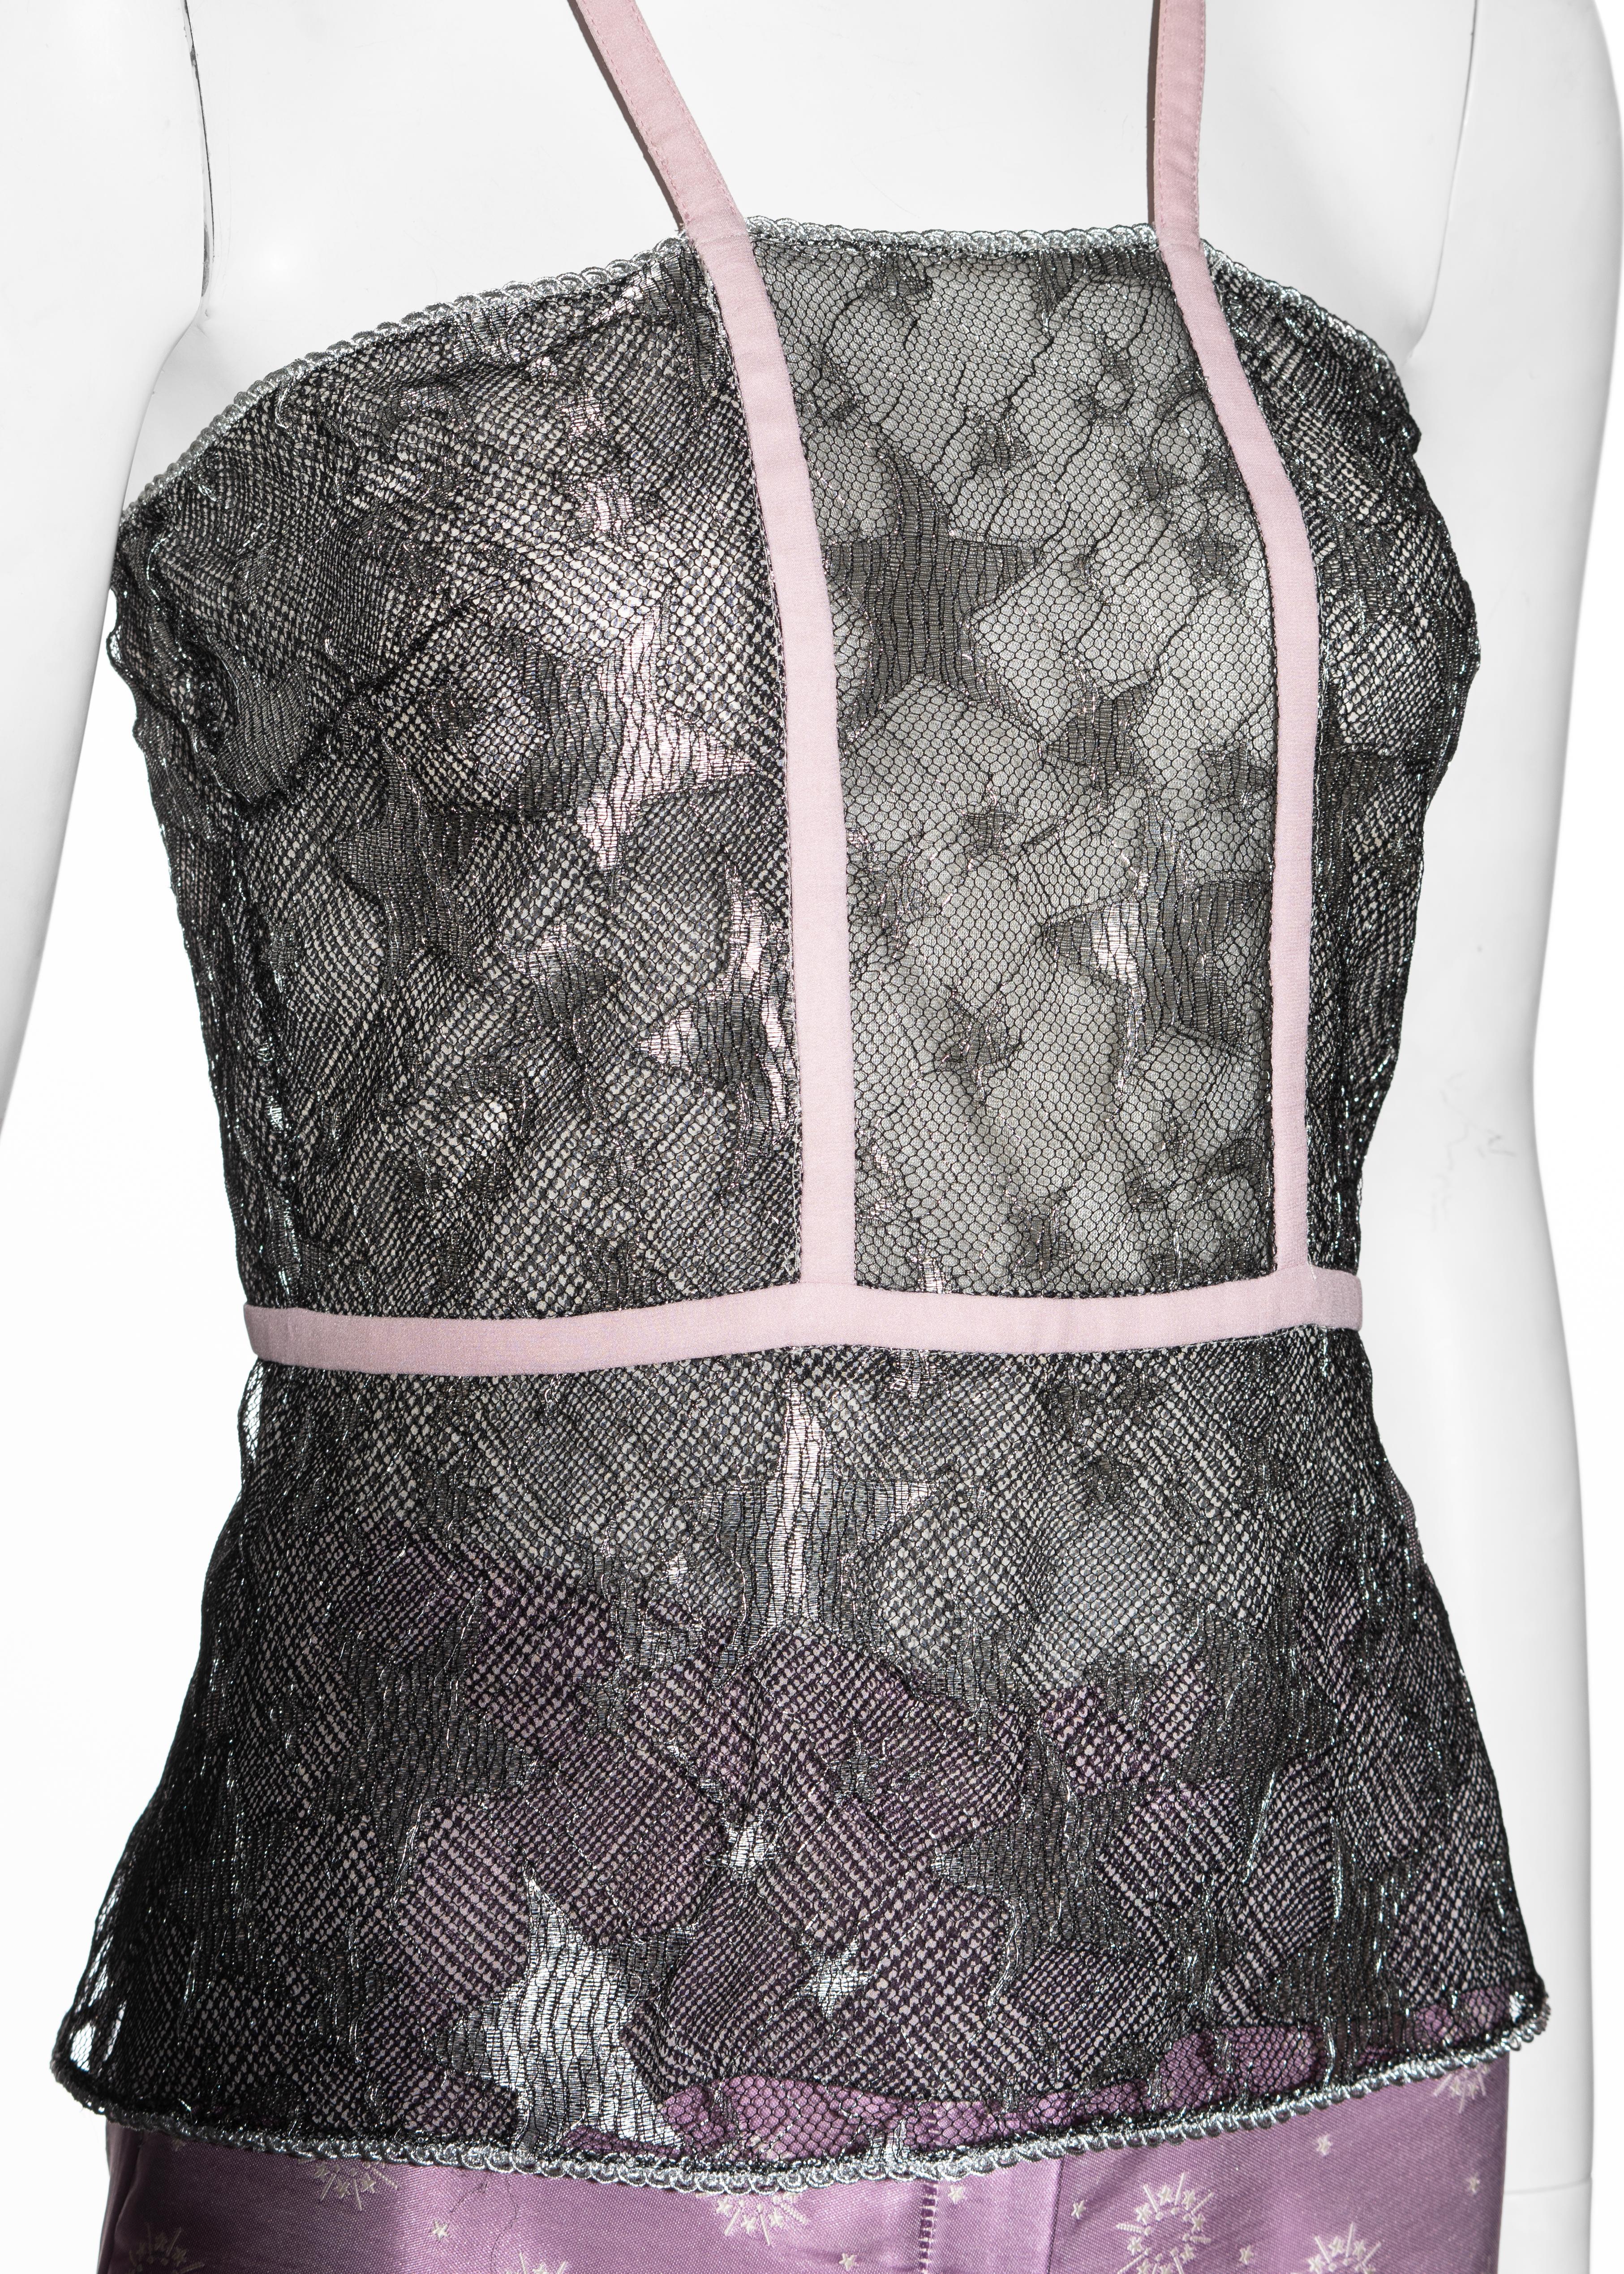 Women's Gianni Versace silver and pink vest and hot pants set, ss 1998